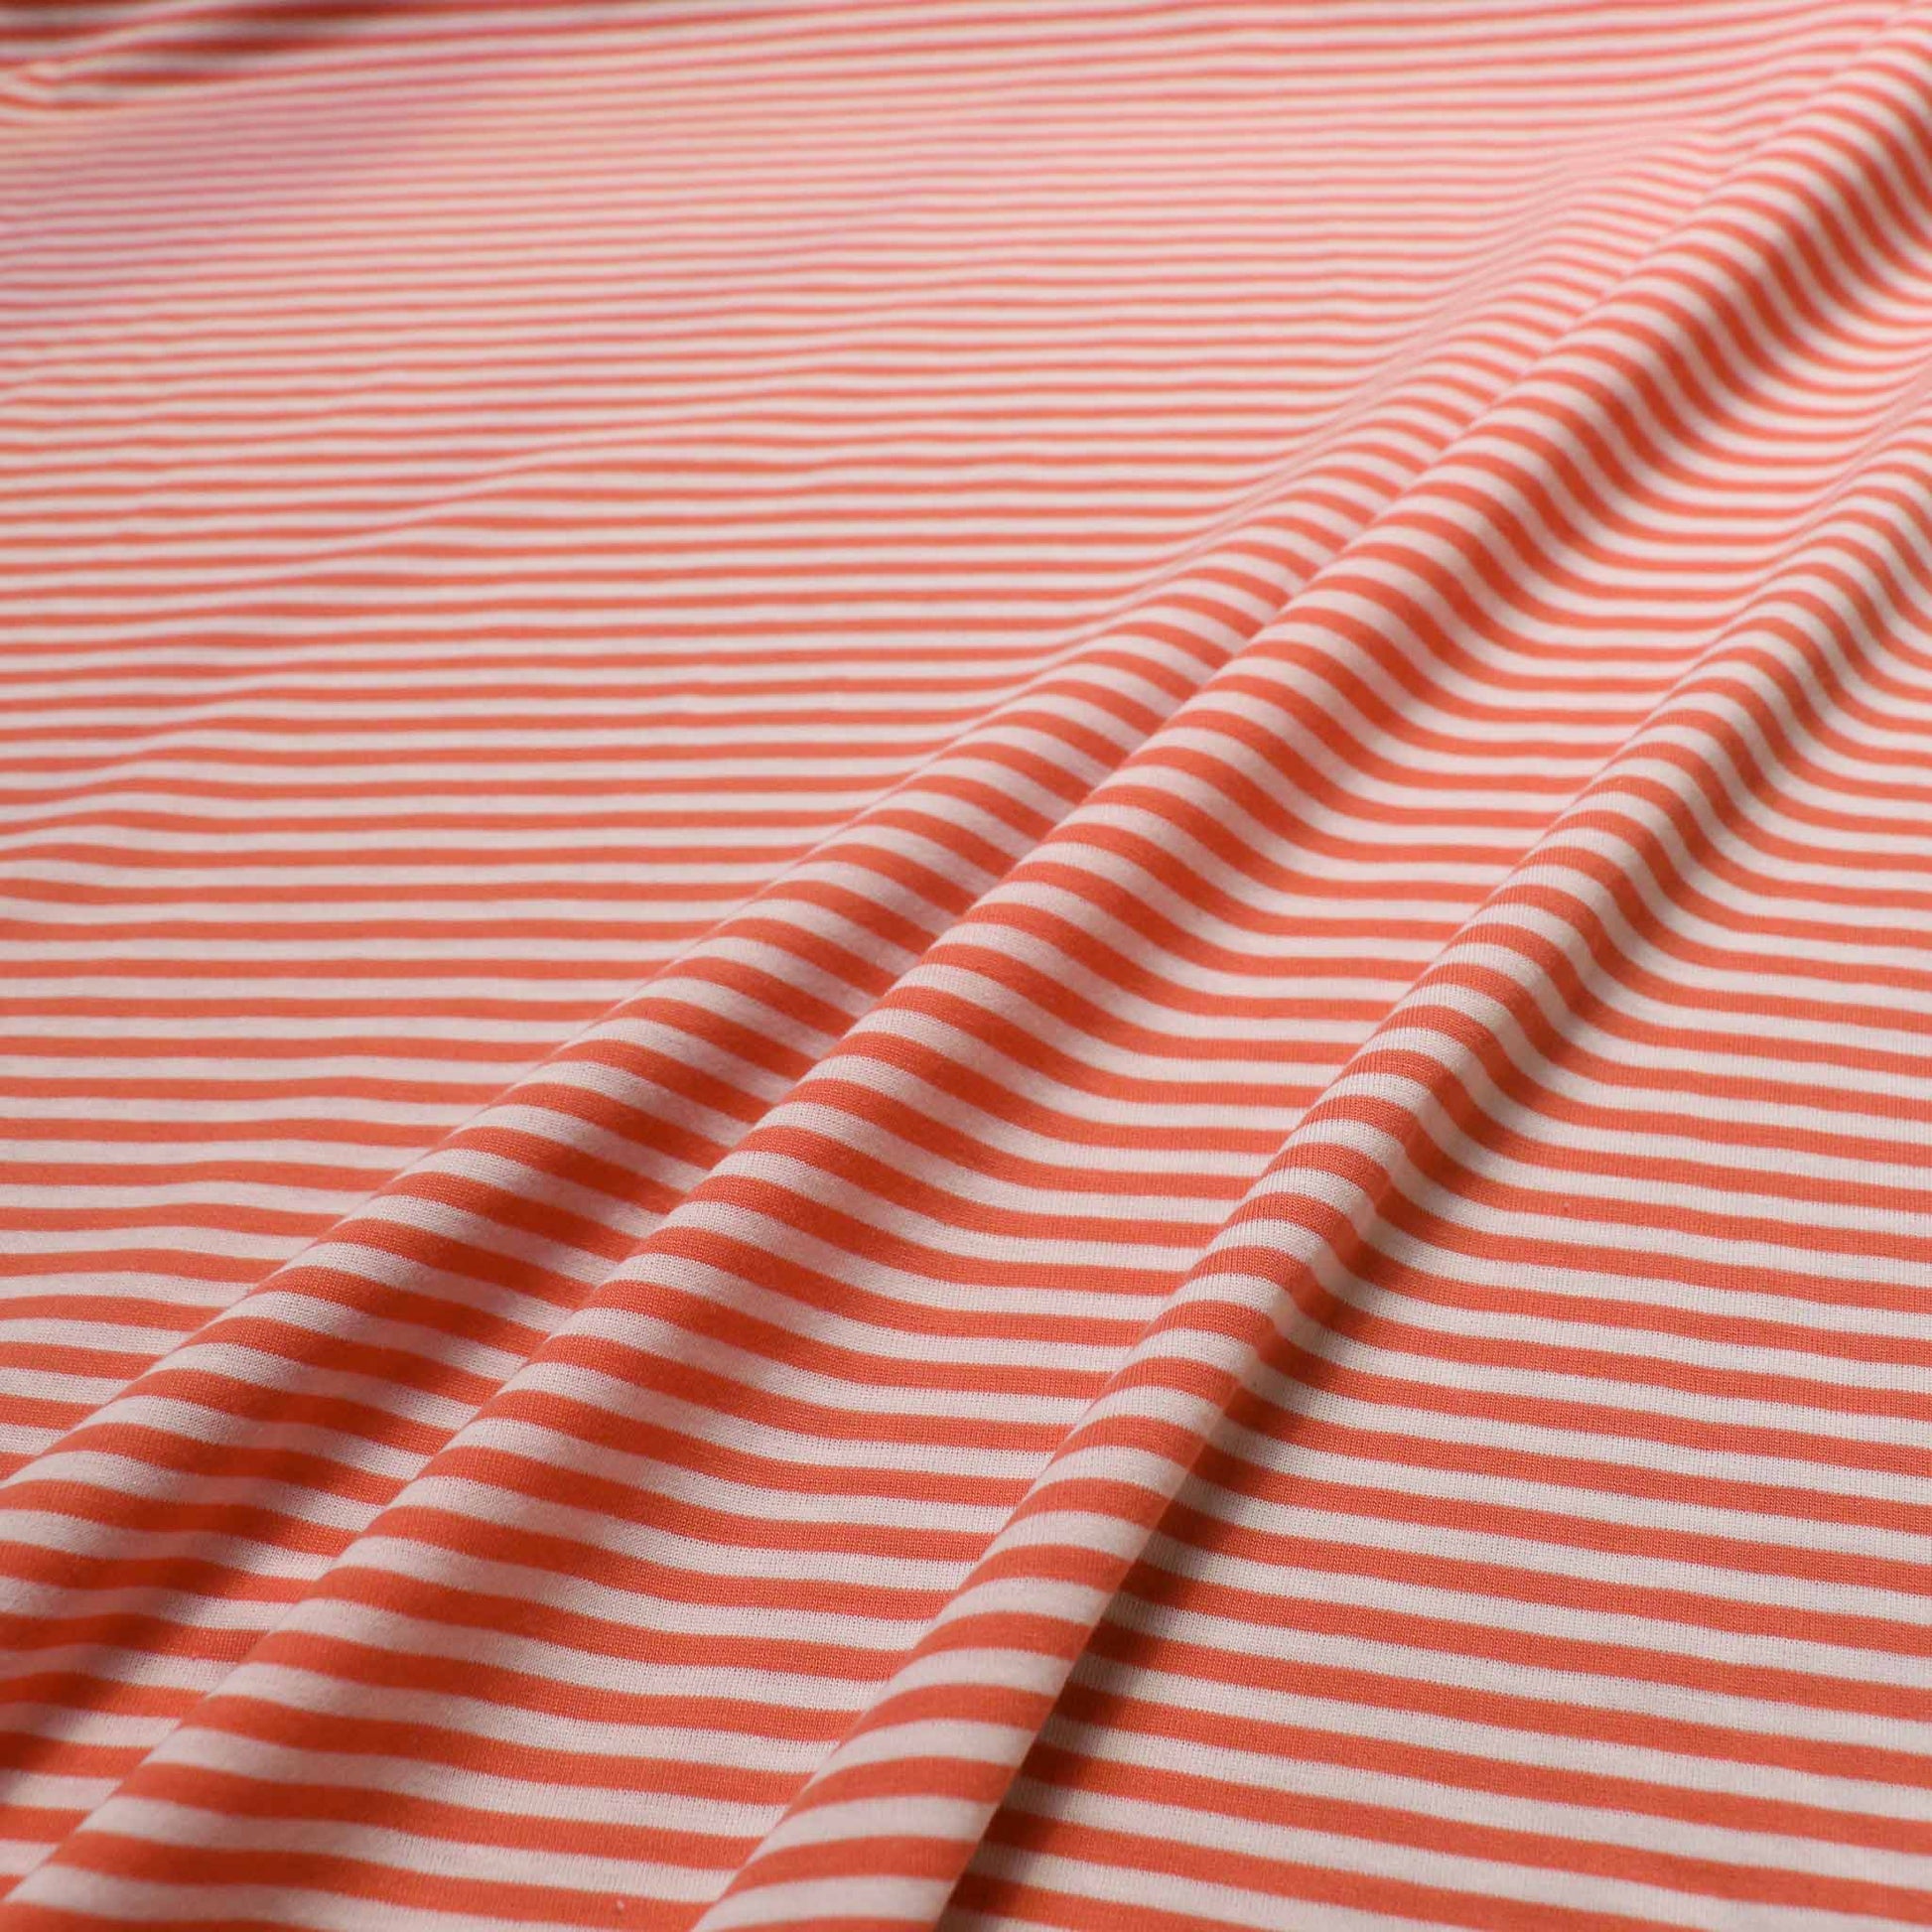 coral orange striped polycotton jersey fabric for dressmaking from cloth control